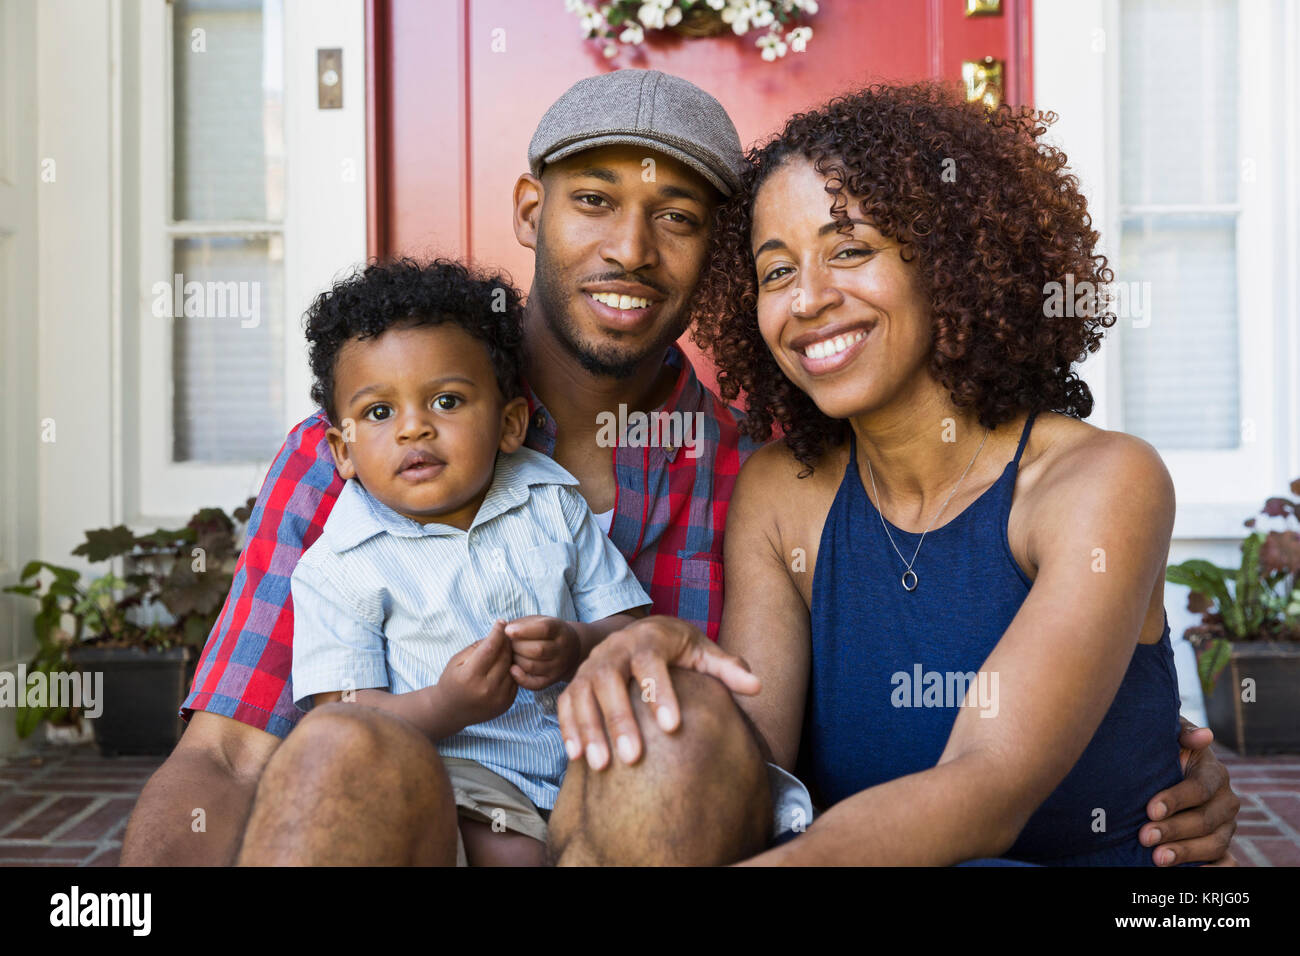 Smiling young couple sitting on/stoop avec fils Banque D'Images